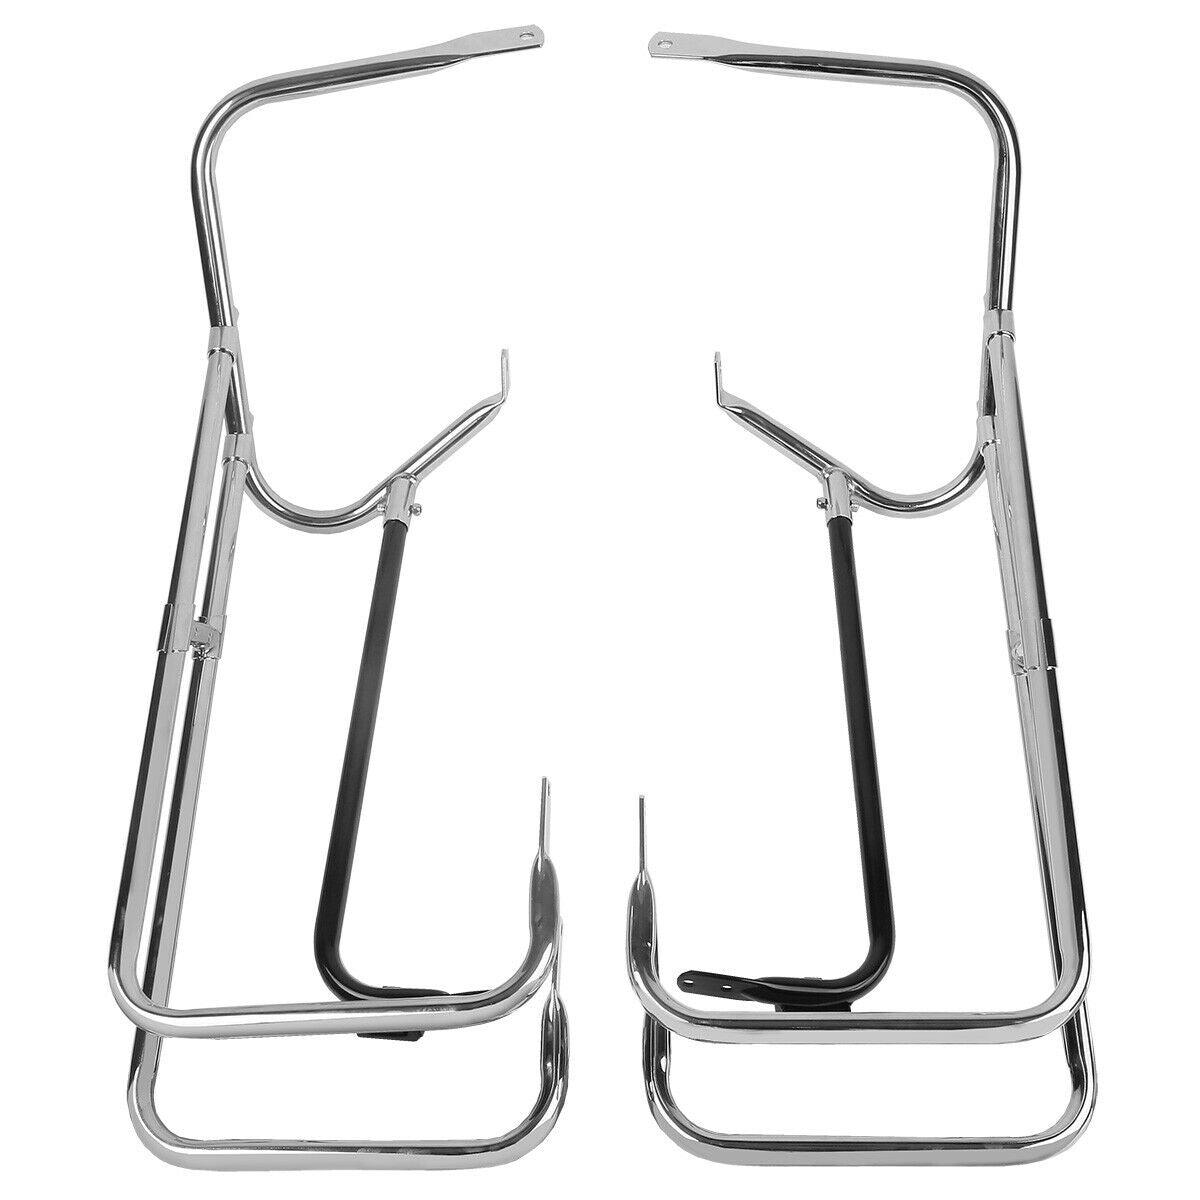 Chrome Saddlebag Guard Mount Fit For Harley Touring Electra Glide FLHT 97-08 07 - Moto Life Products